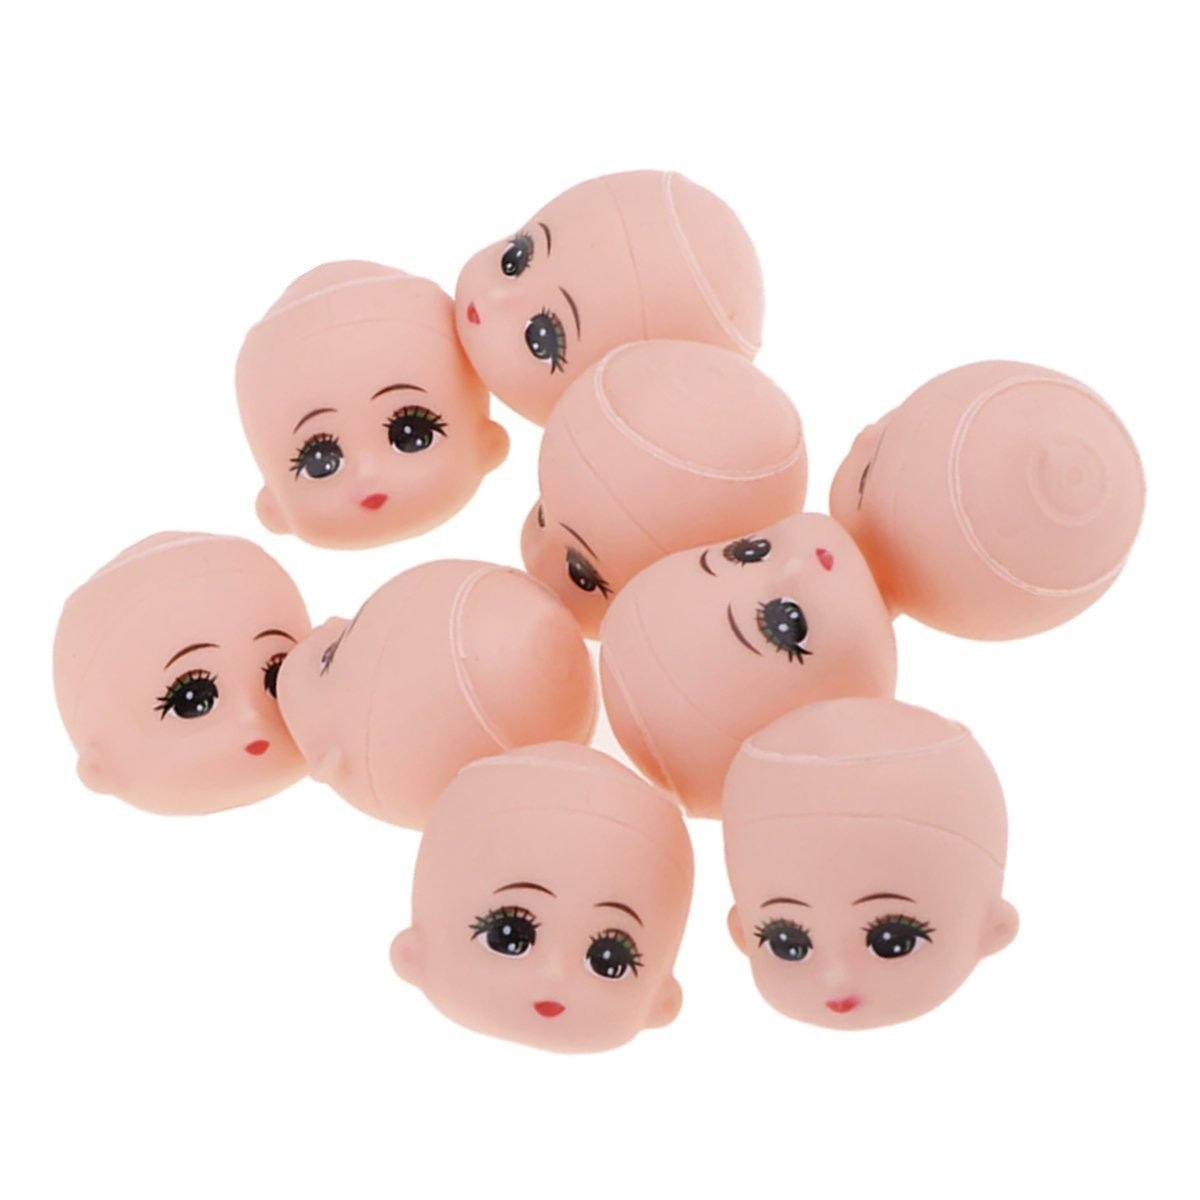 5pcs Baby Doll Heads with Big Eyes For Doll Custom Accessories Mini Keychain etc.